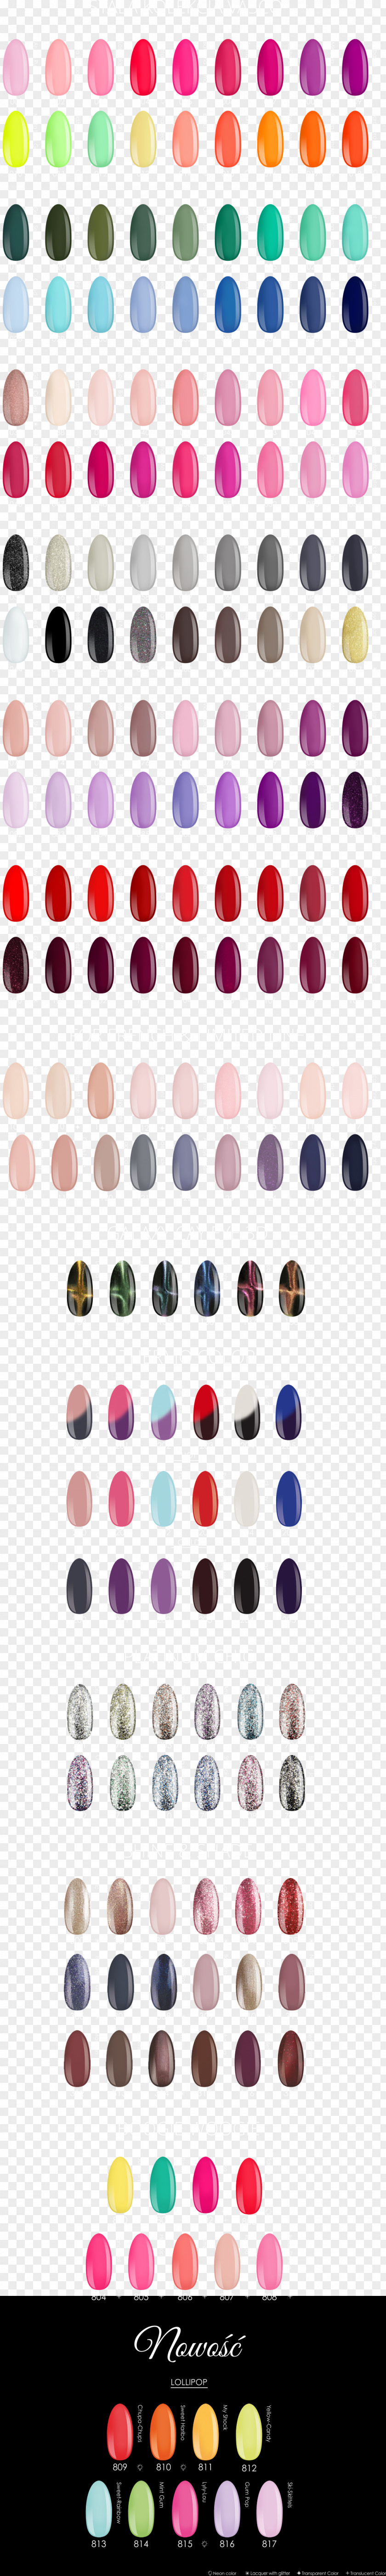 Nail Gel Nails Manicure Lakier Hybrydowy Lacquer PNG